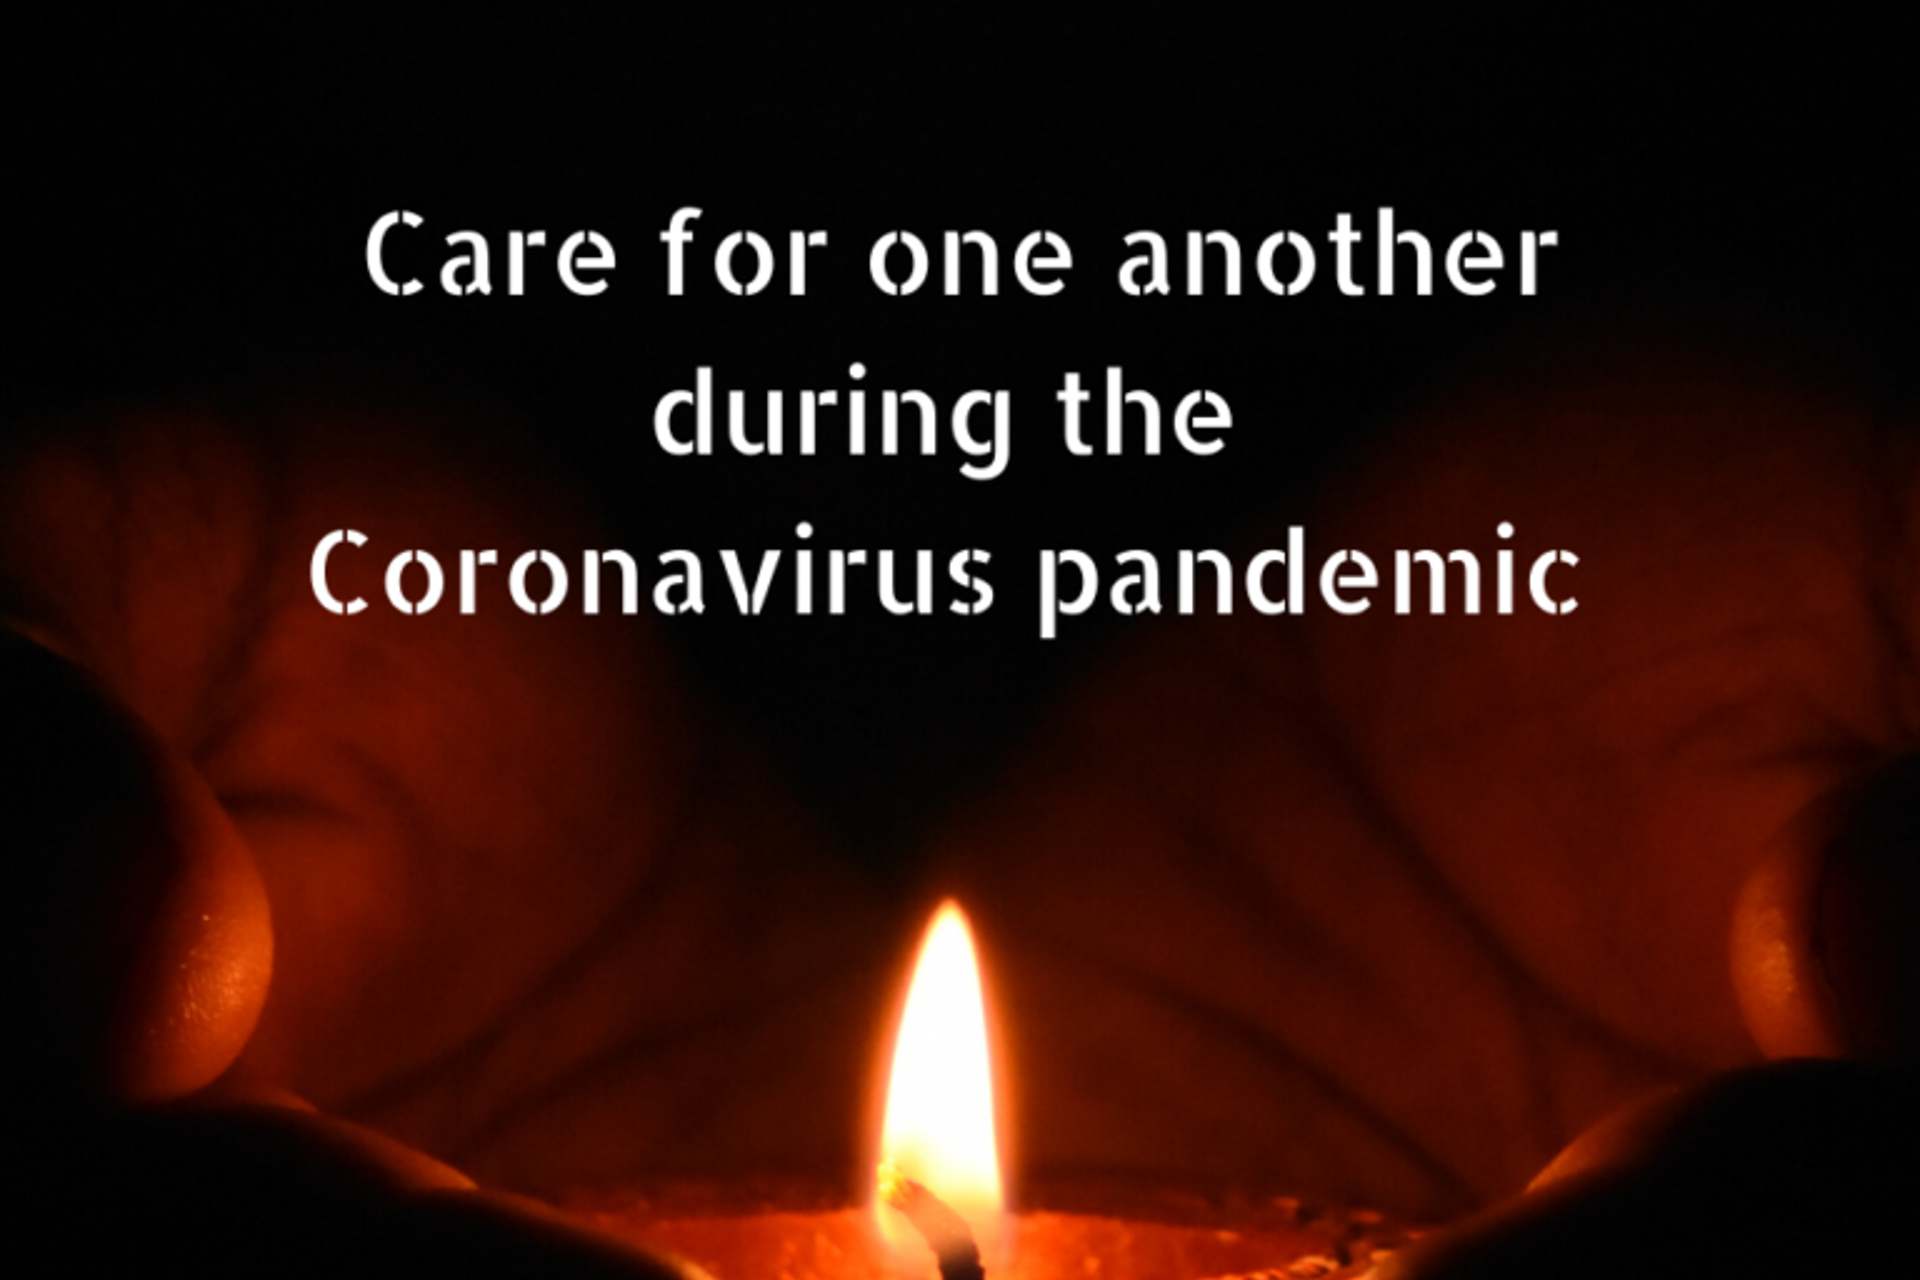 'Care for one another during the Coronavirus pandemic' – Further advice of the Irish Bishops in response to the COVID-19 Coronavirus